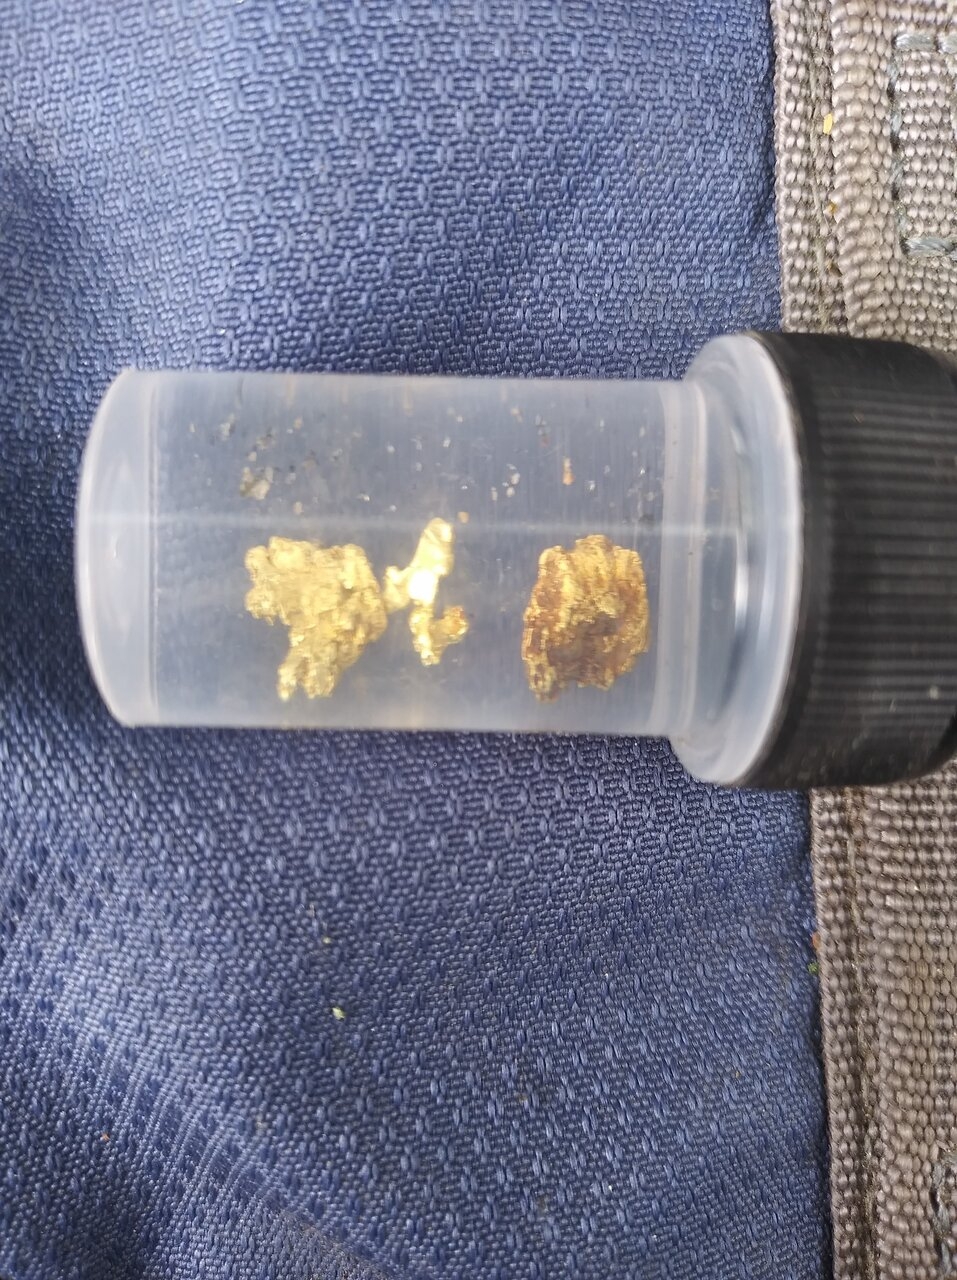 Some nice little nugs the gold kind